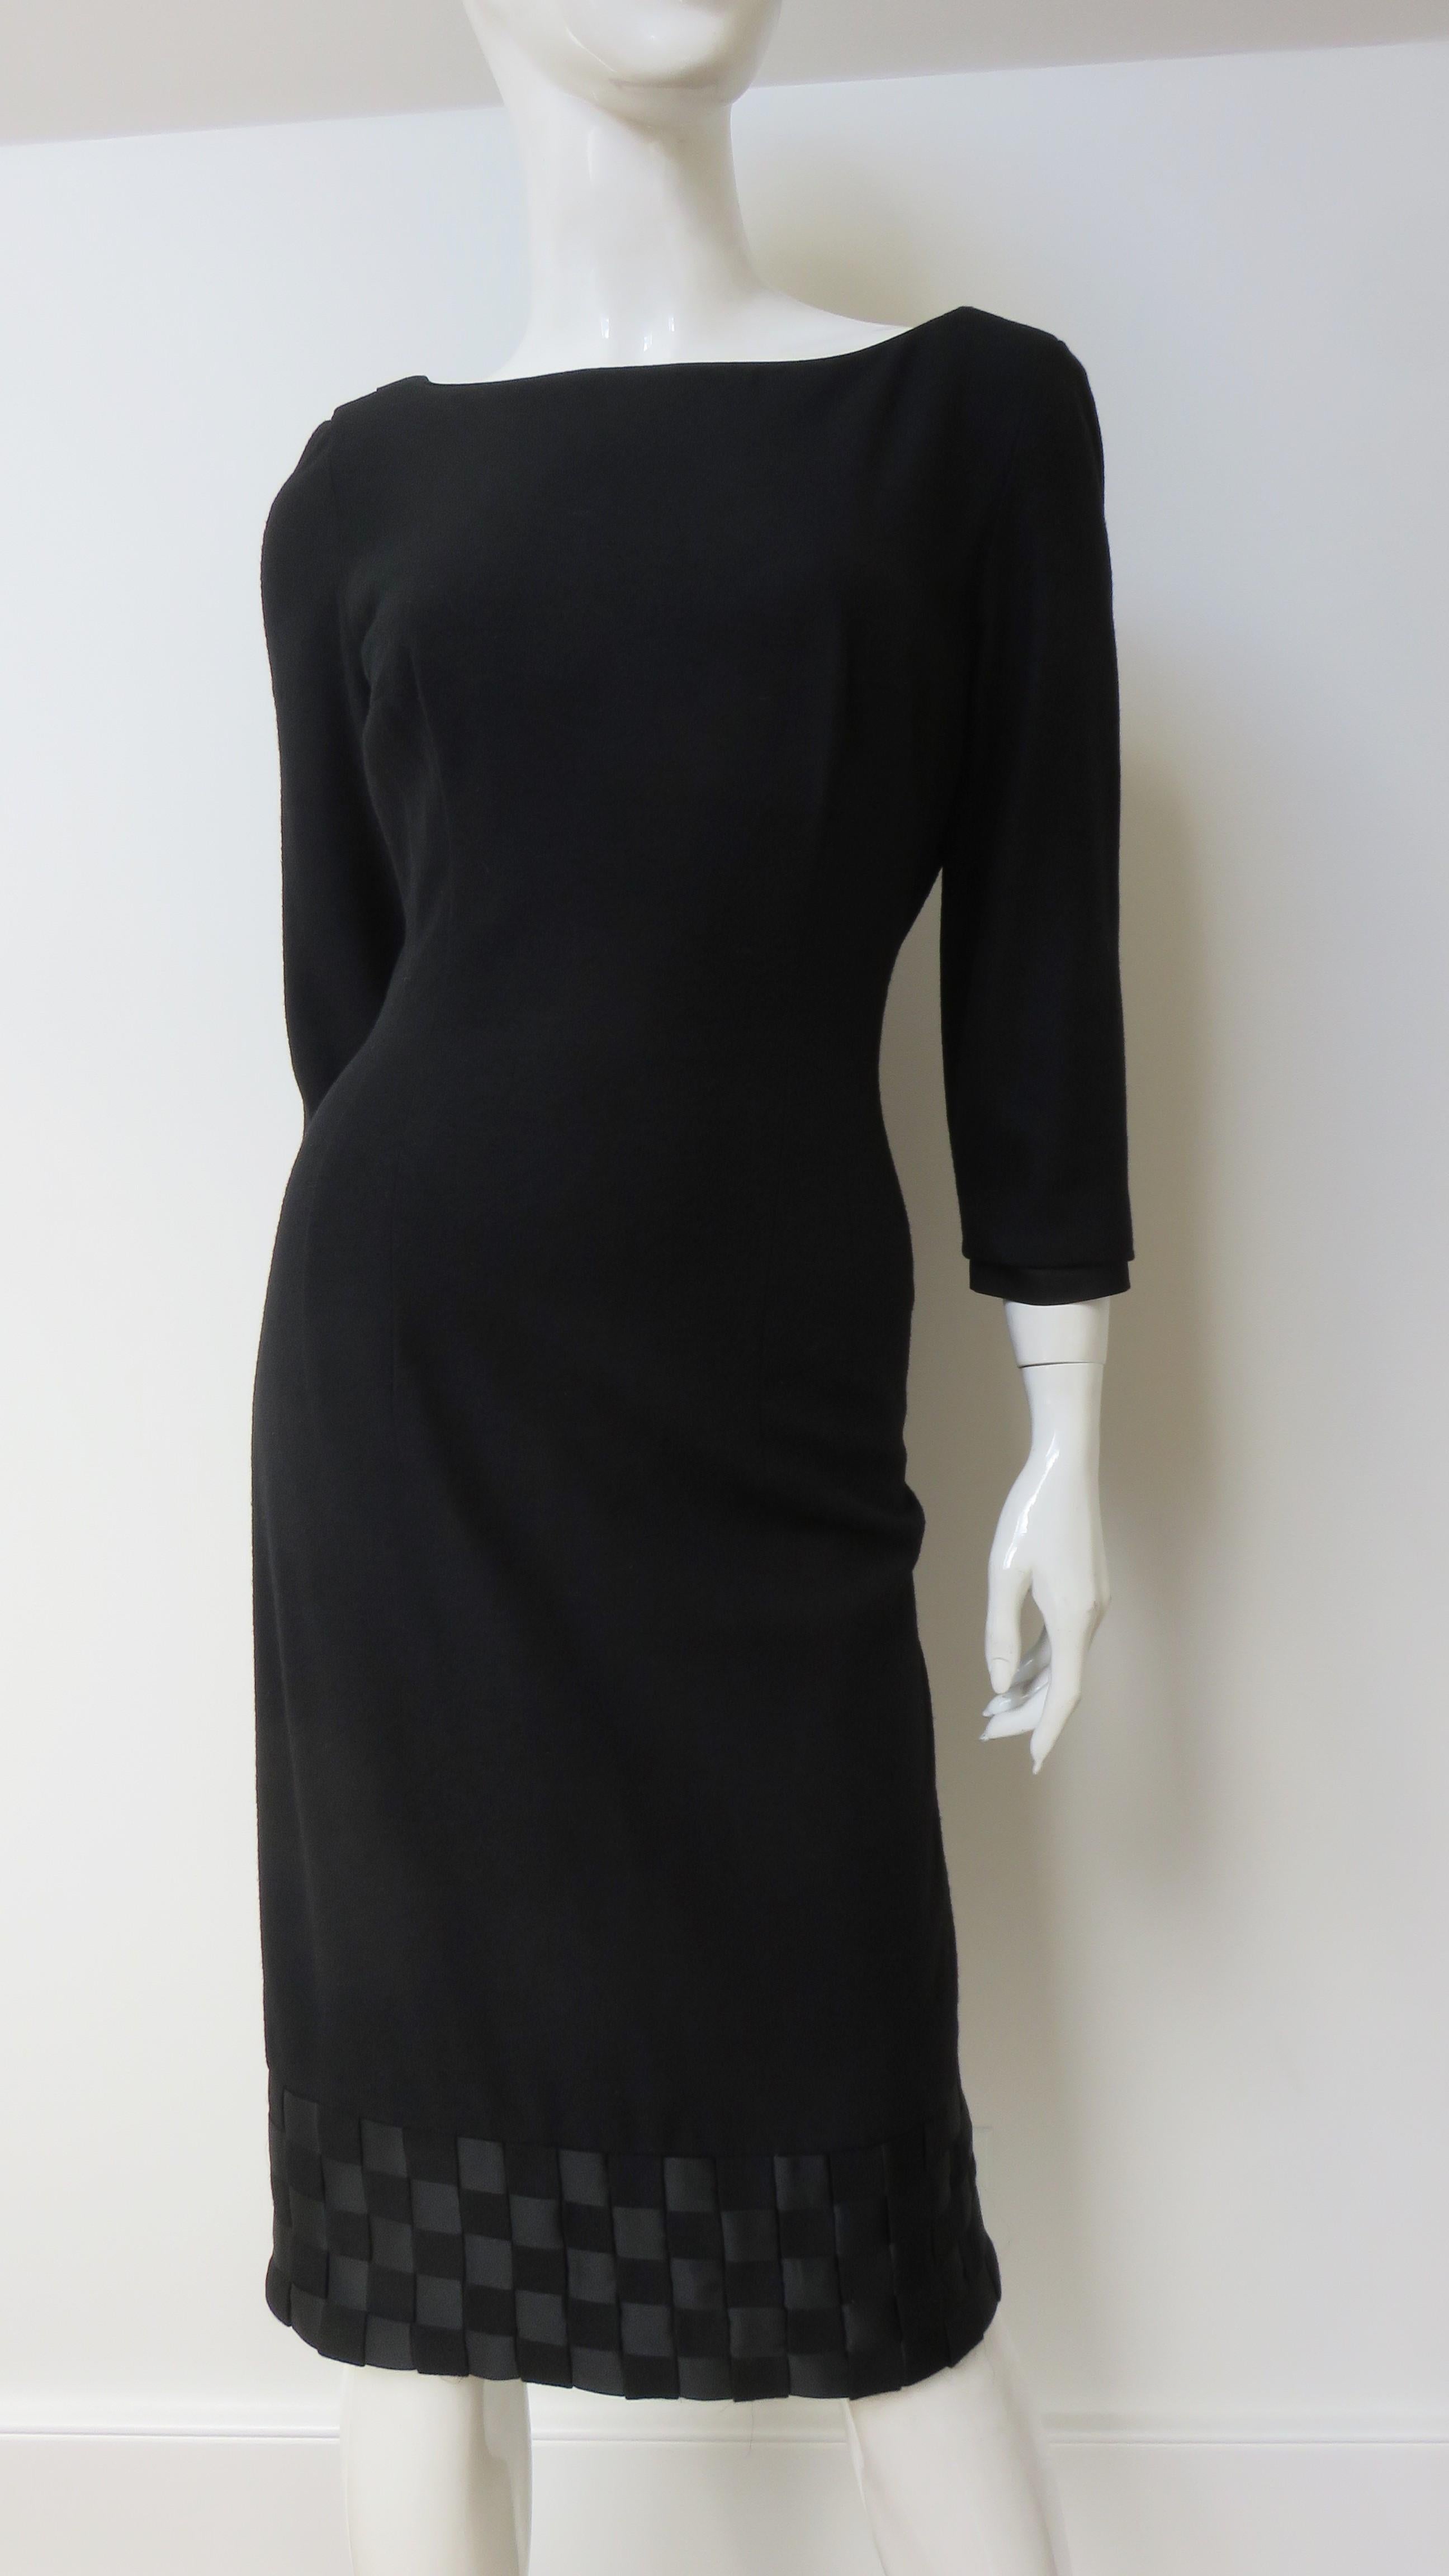 Mr Blackwell Woven Hem and Collar 1950s Dress For Sale 1